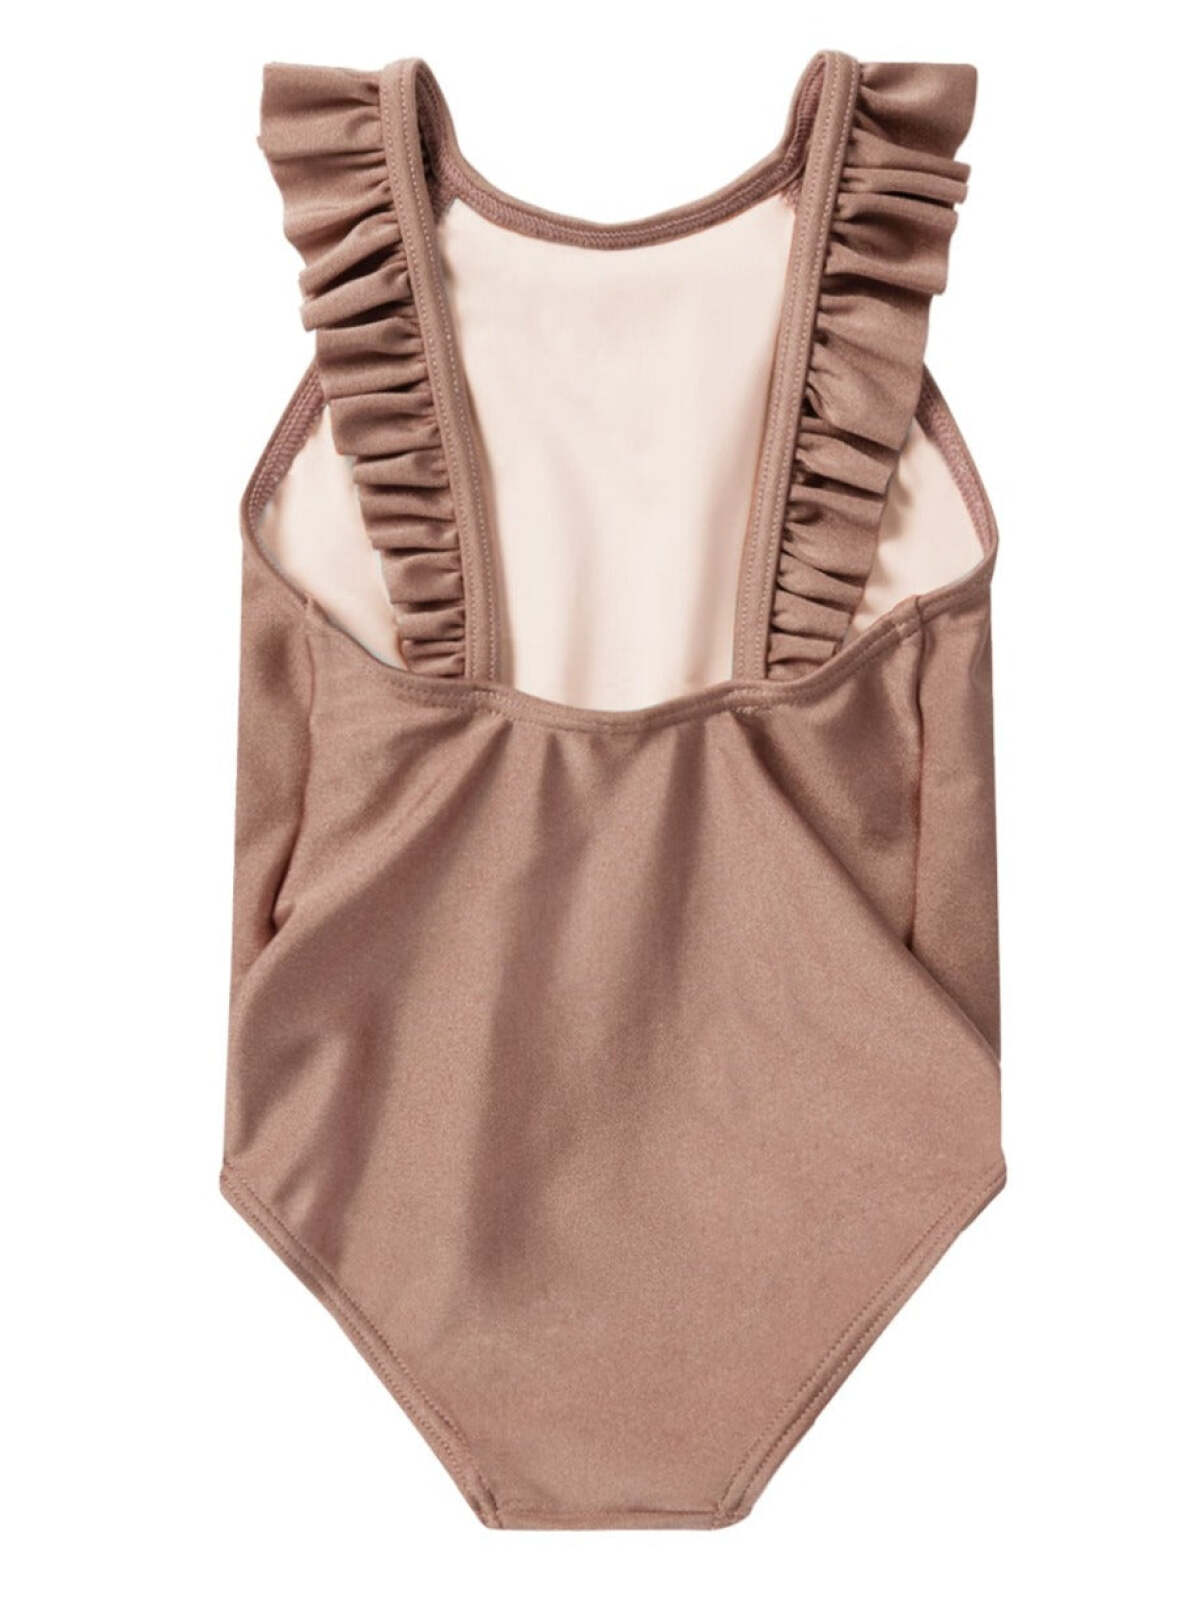 Rylee & Cru Arielle One Piece Swimsuit, Mulberry Shimmer